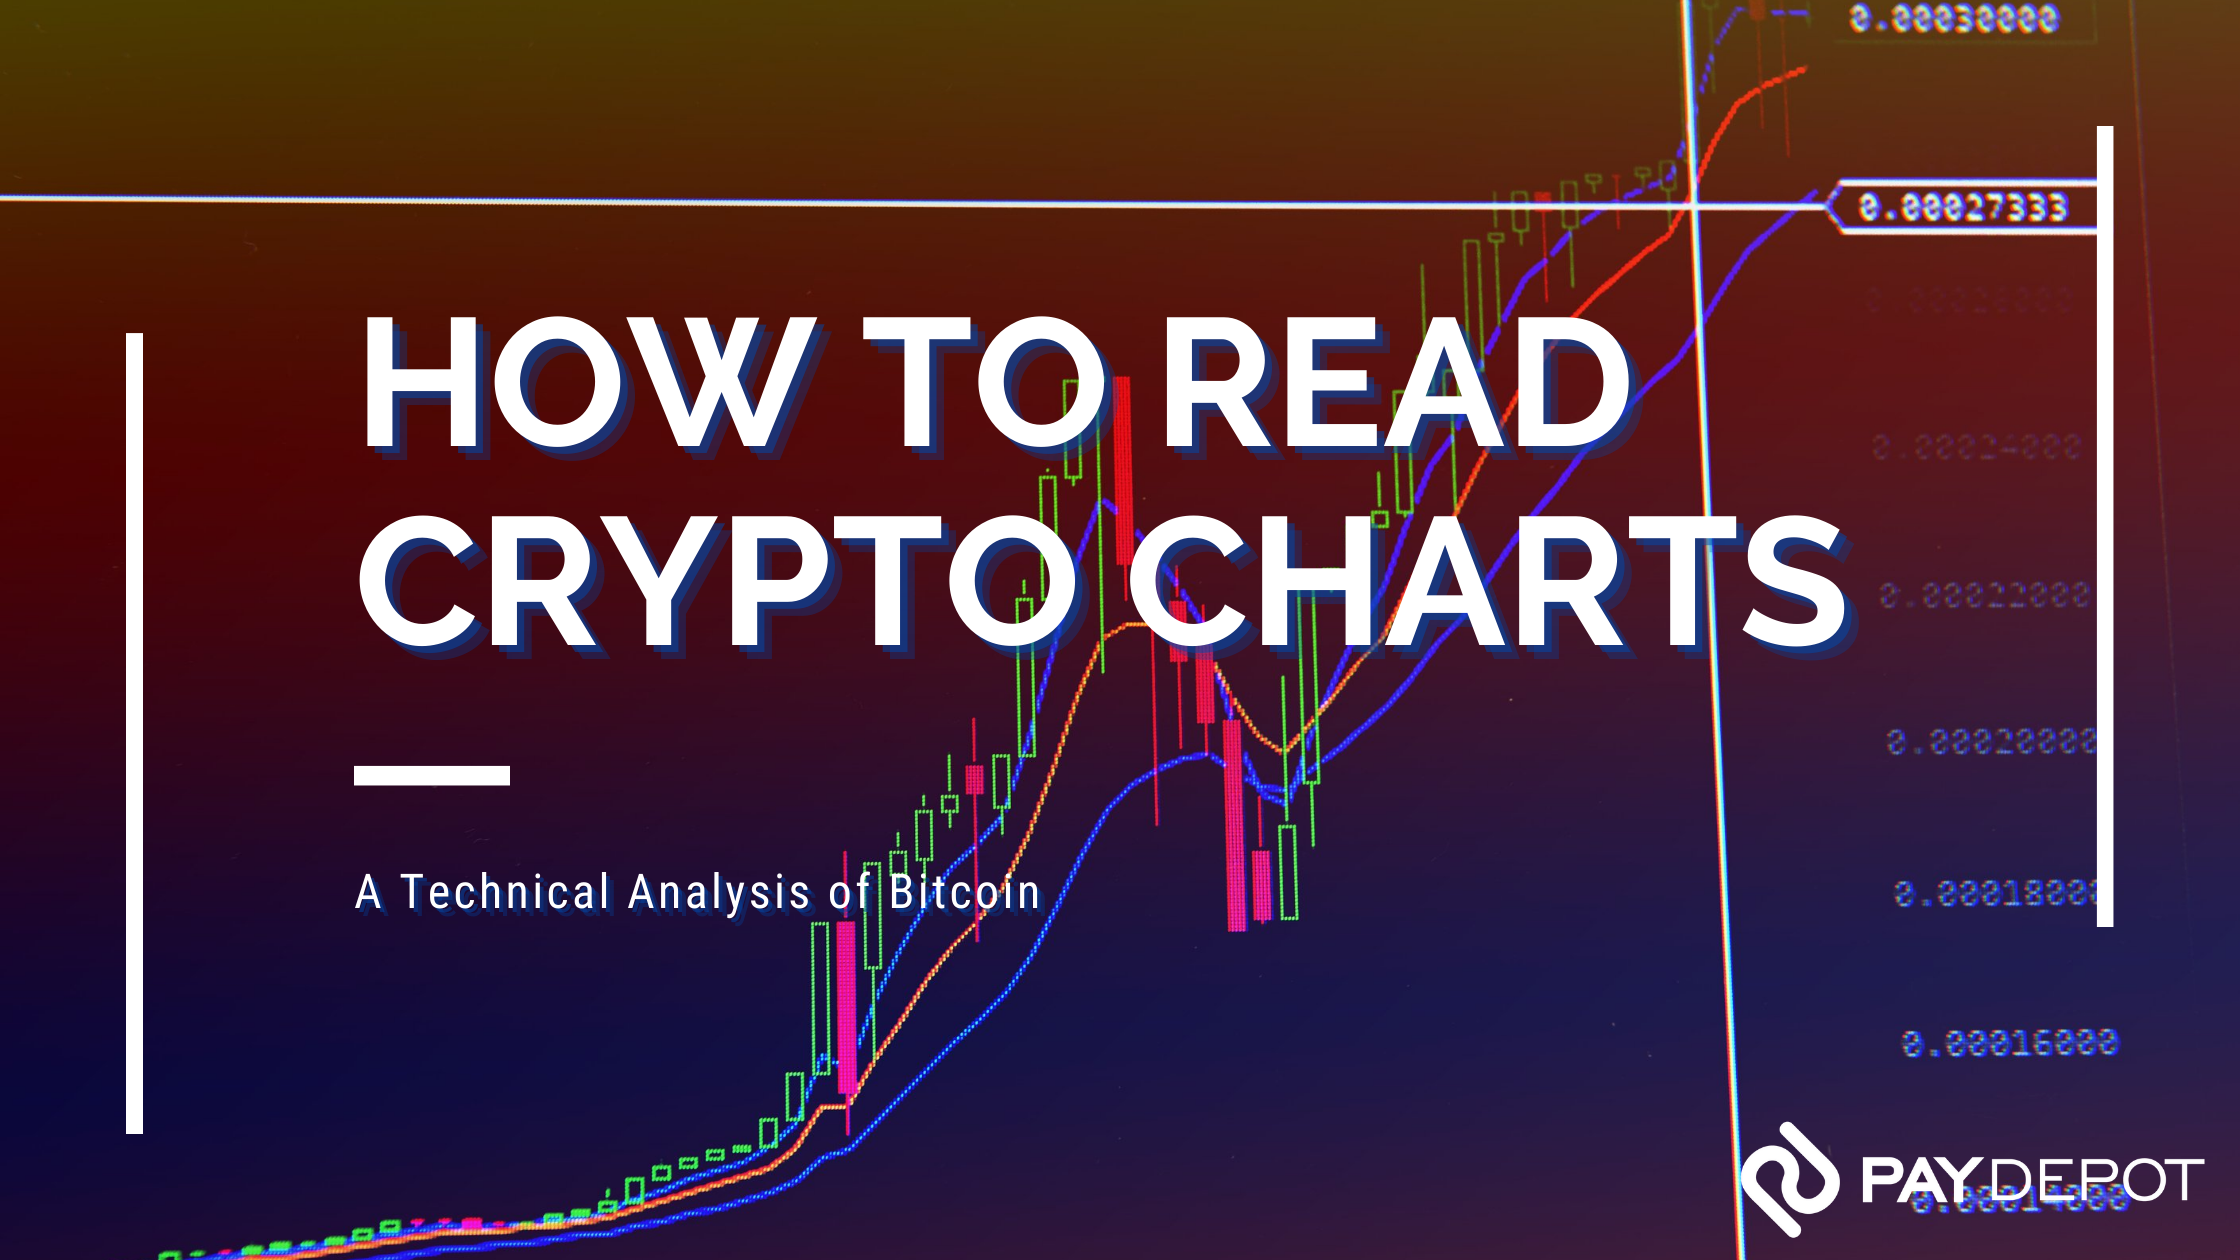 How to Read Crypto Charts: A Technical Analysis of Bitcoin